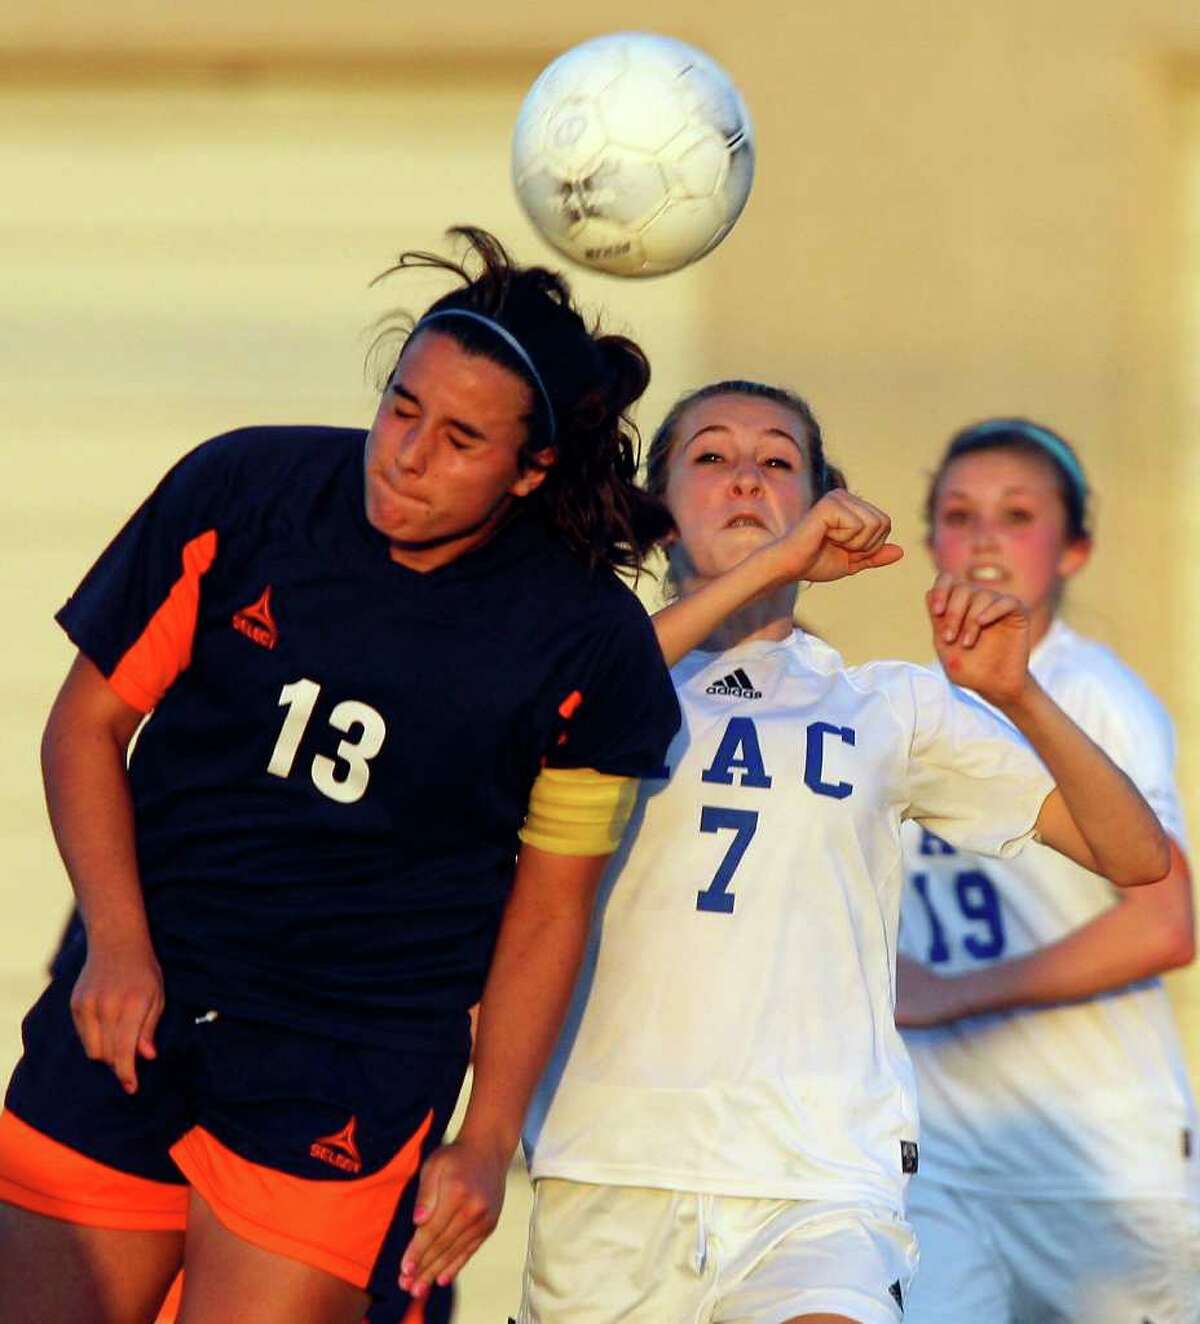 FOR SPORTS - Brandeis' Maddie Harwerth and MacArthur's Brianna Livecchi go up for the ball during overtime action Friday April 1, 2011 at Blossom Soccer Stadium. MacArthur won 1-0. (PHOTO BY EDWARD A. ORNELAS/eaornelas@express-news.net)